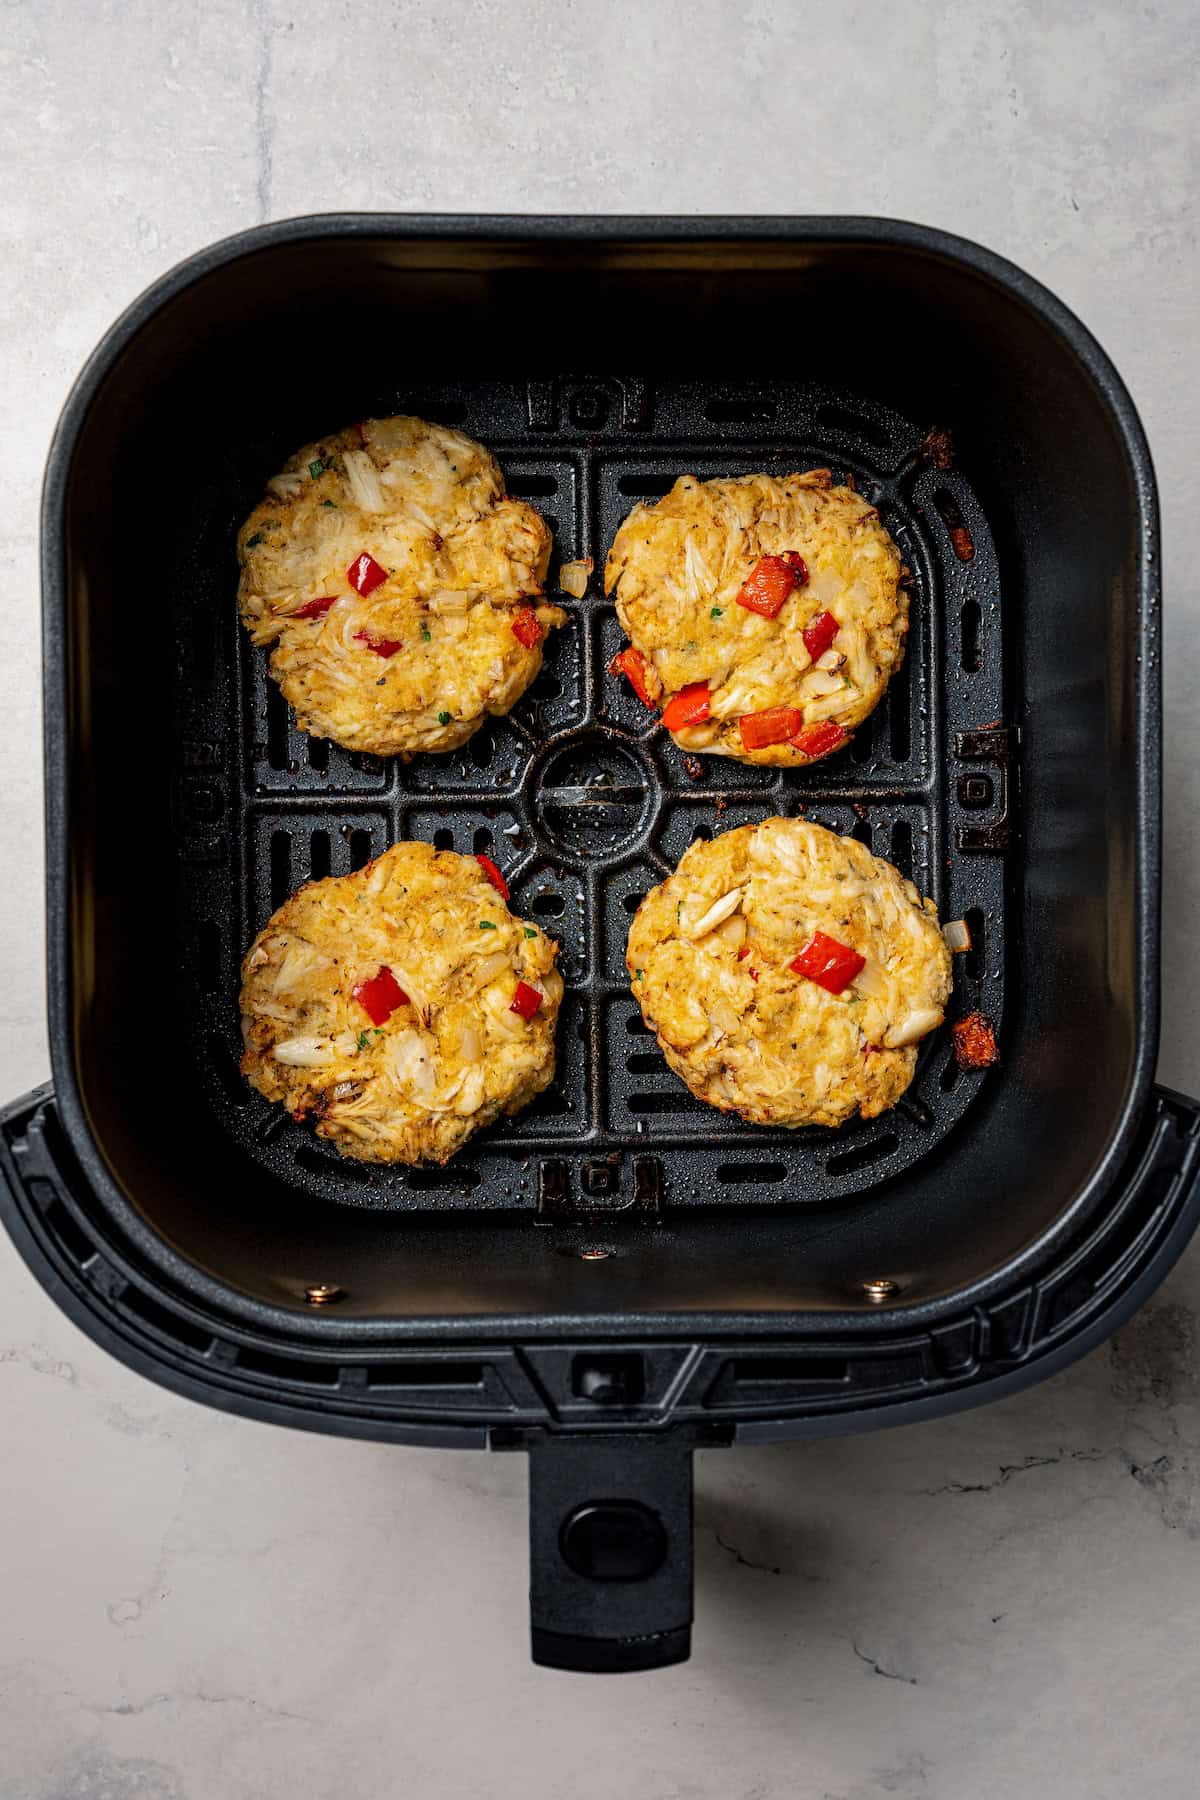 Cooked crab cakes inside the air fryer.